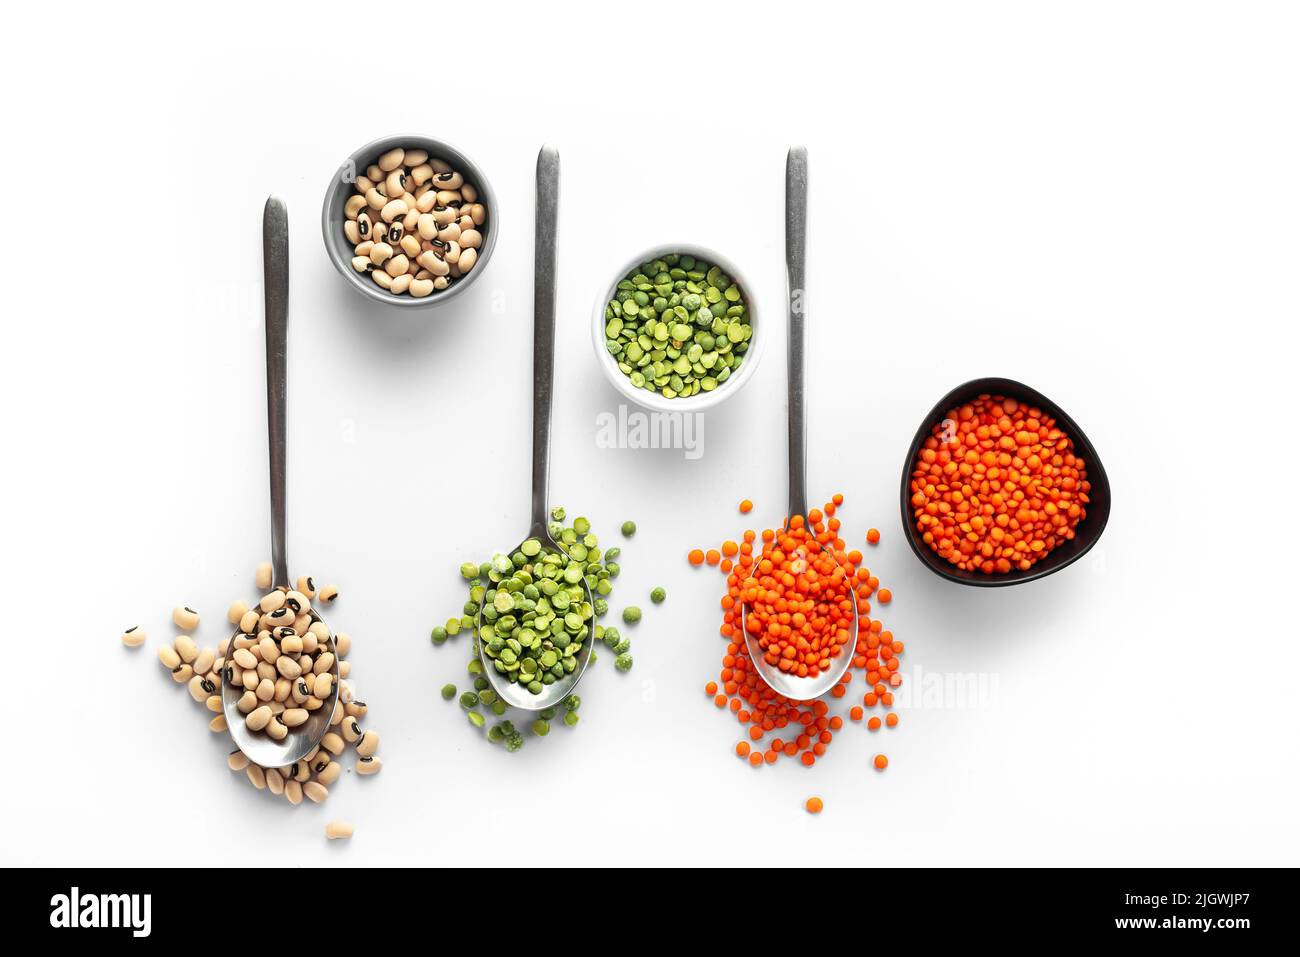 Super food tag with fenugreek seeds, bukwheat seeds, gold linseeds and brown linseeds. Stock Photo